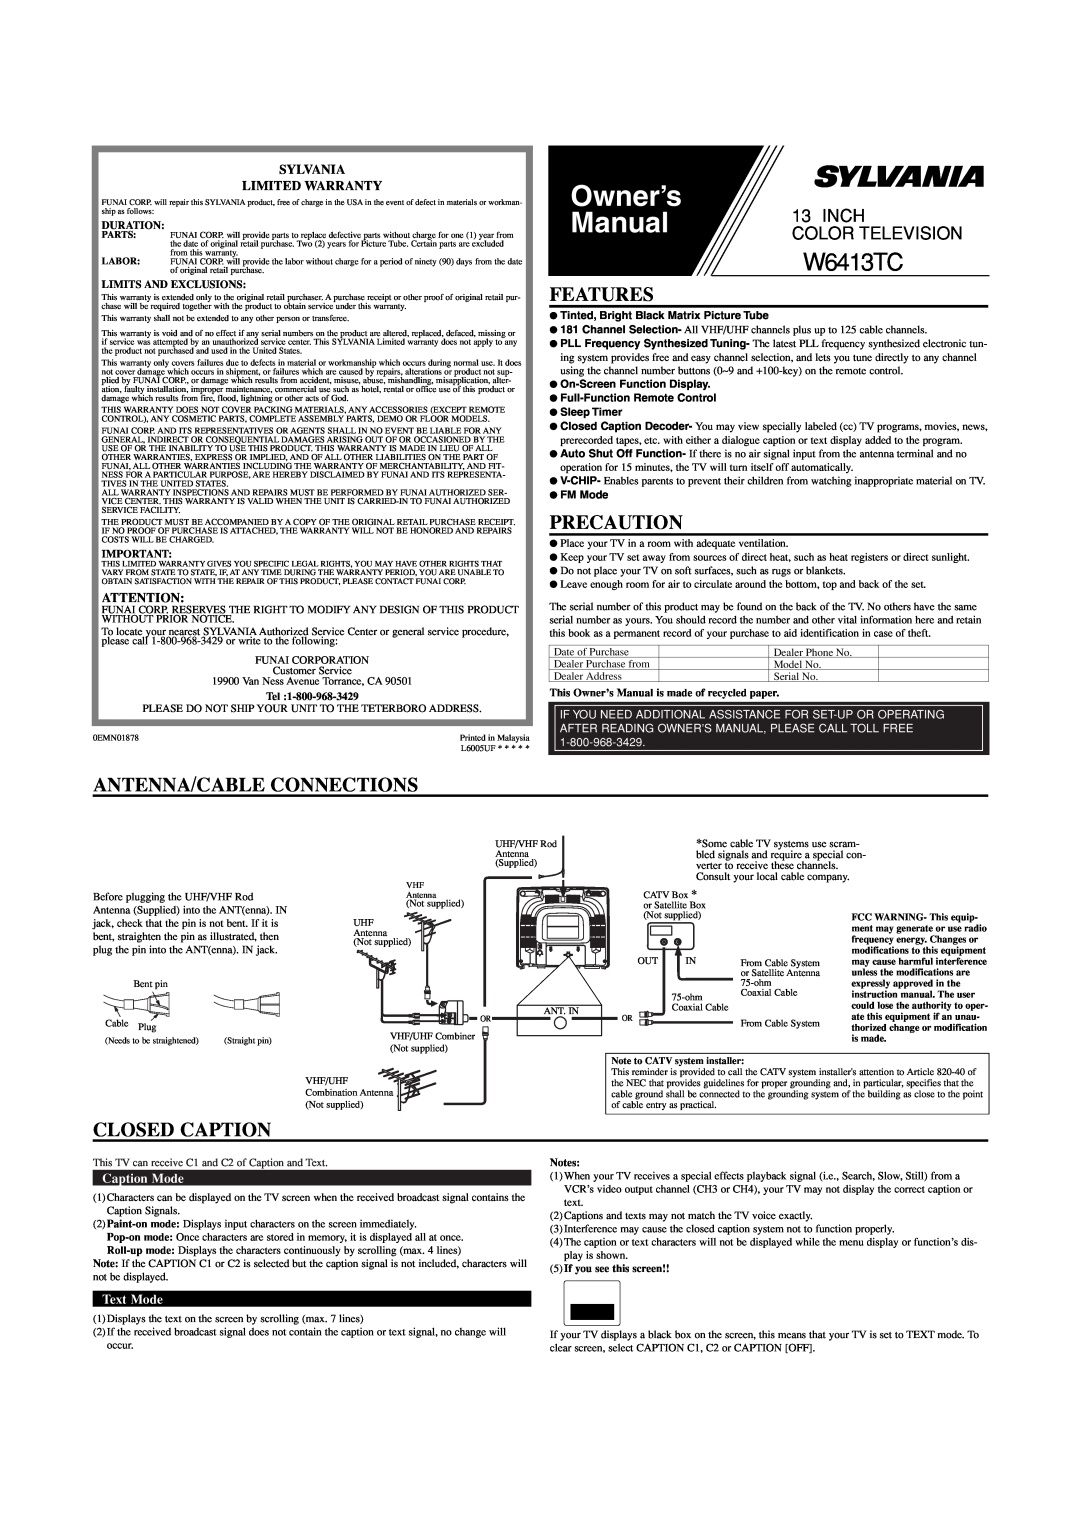 Sylvania W6413TC owner manual Features, Precaution, Antenna/Cable Connections, Closed Caption, Sylvania Limited Warranty 